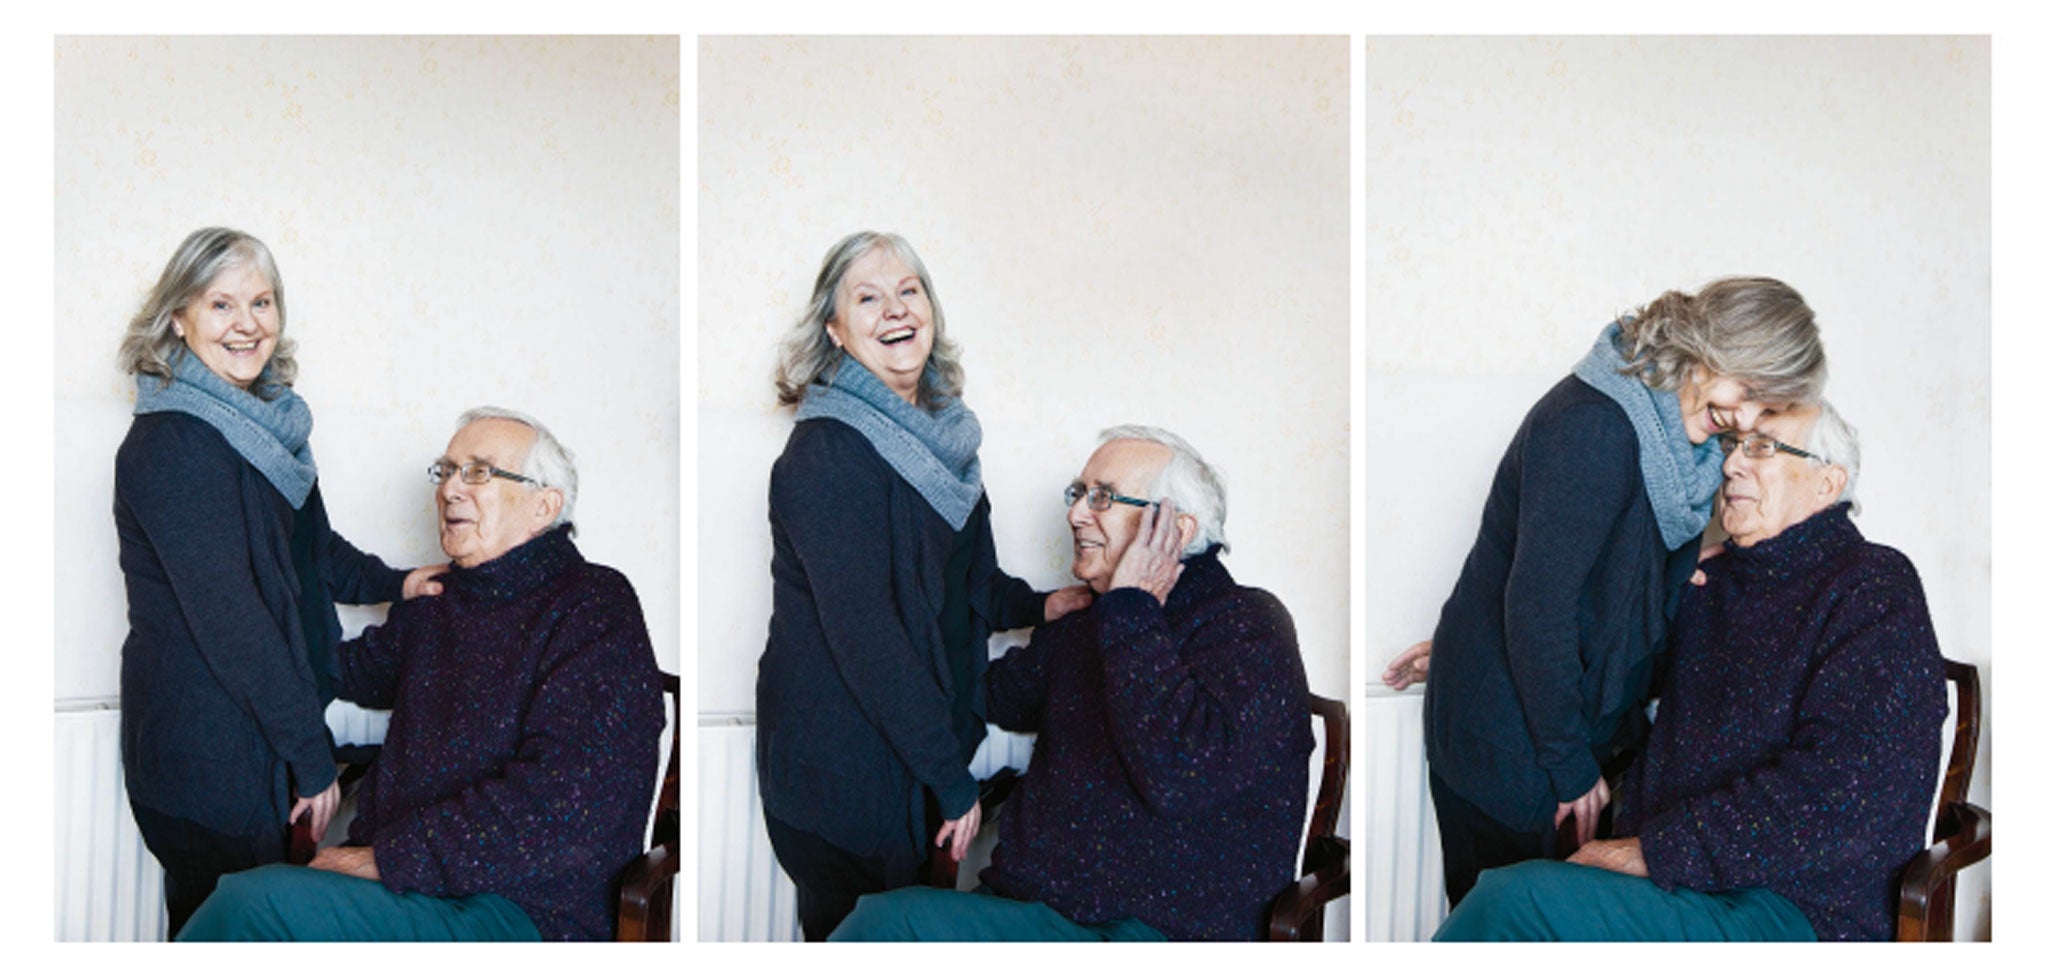 Yvonne and John England, photographed in their home - a former hotel - where they first met in 1962